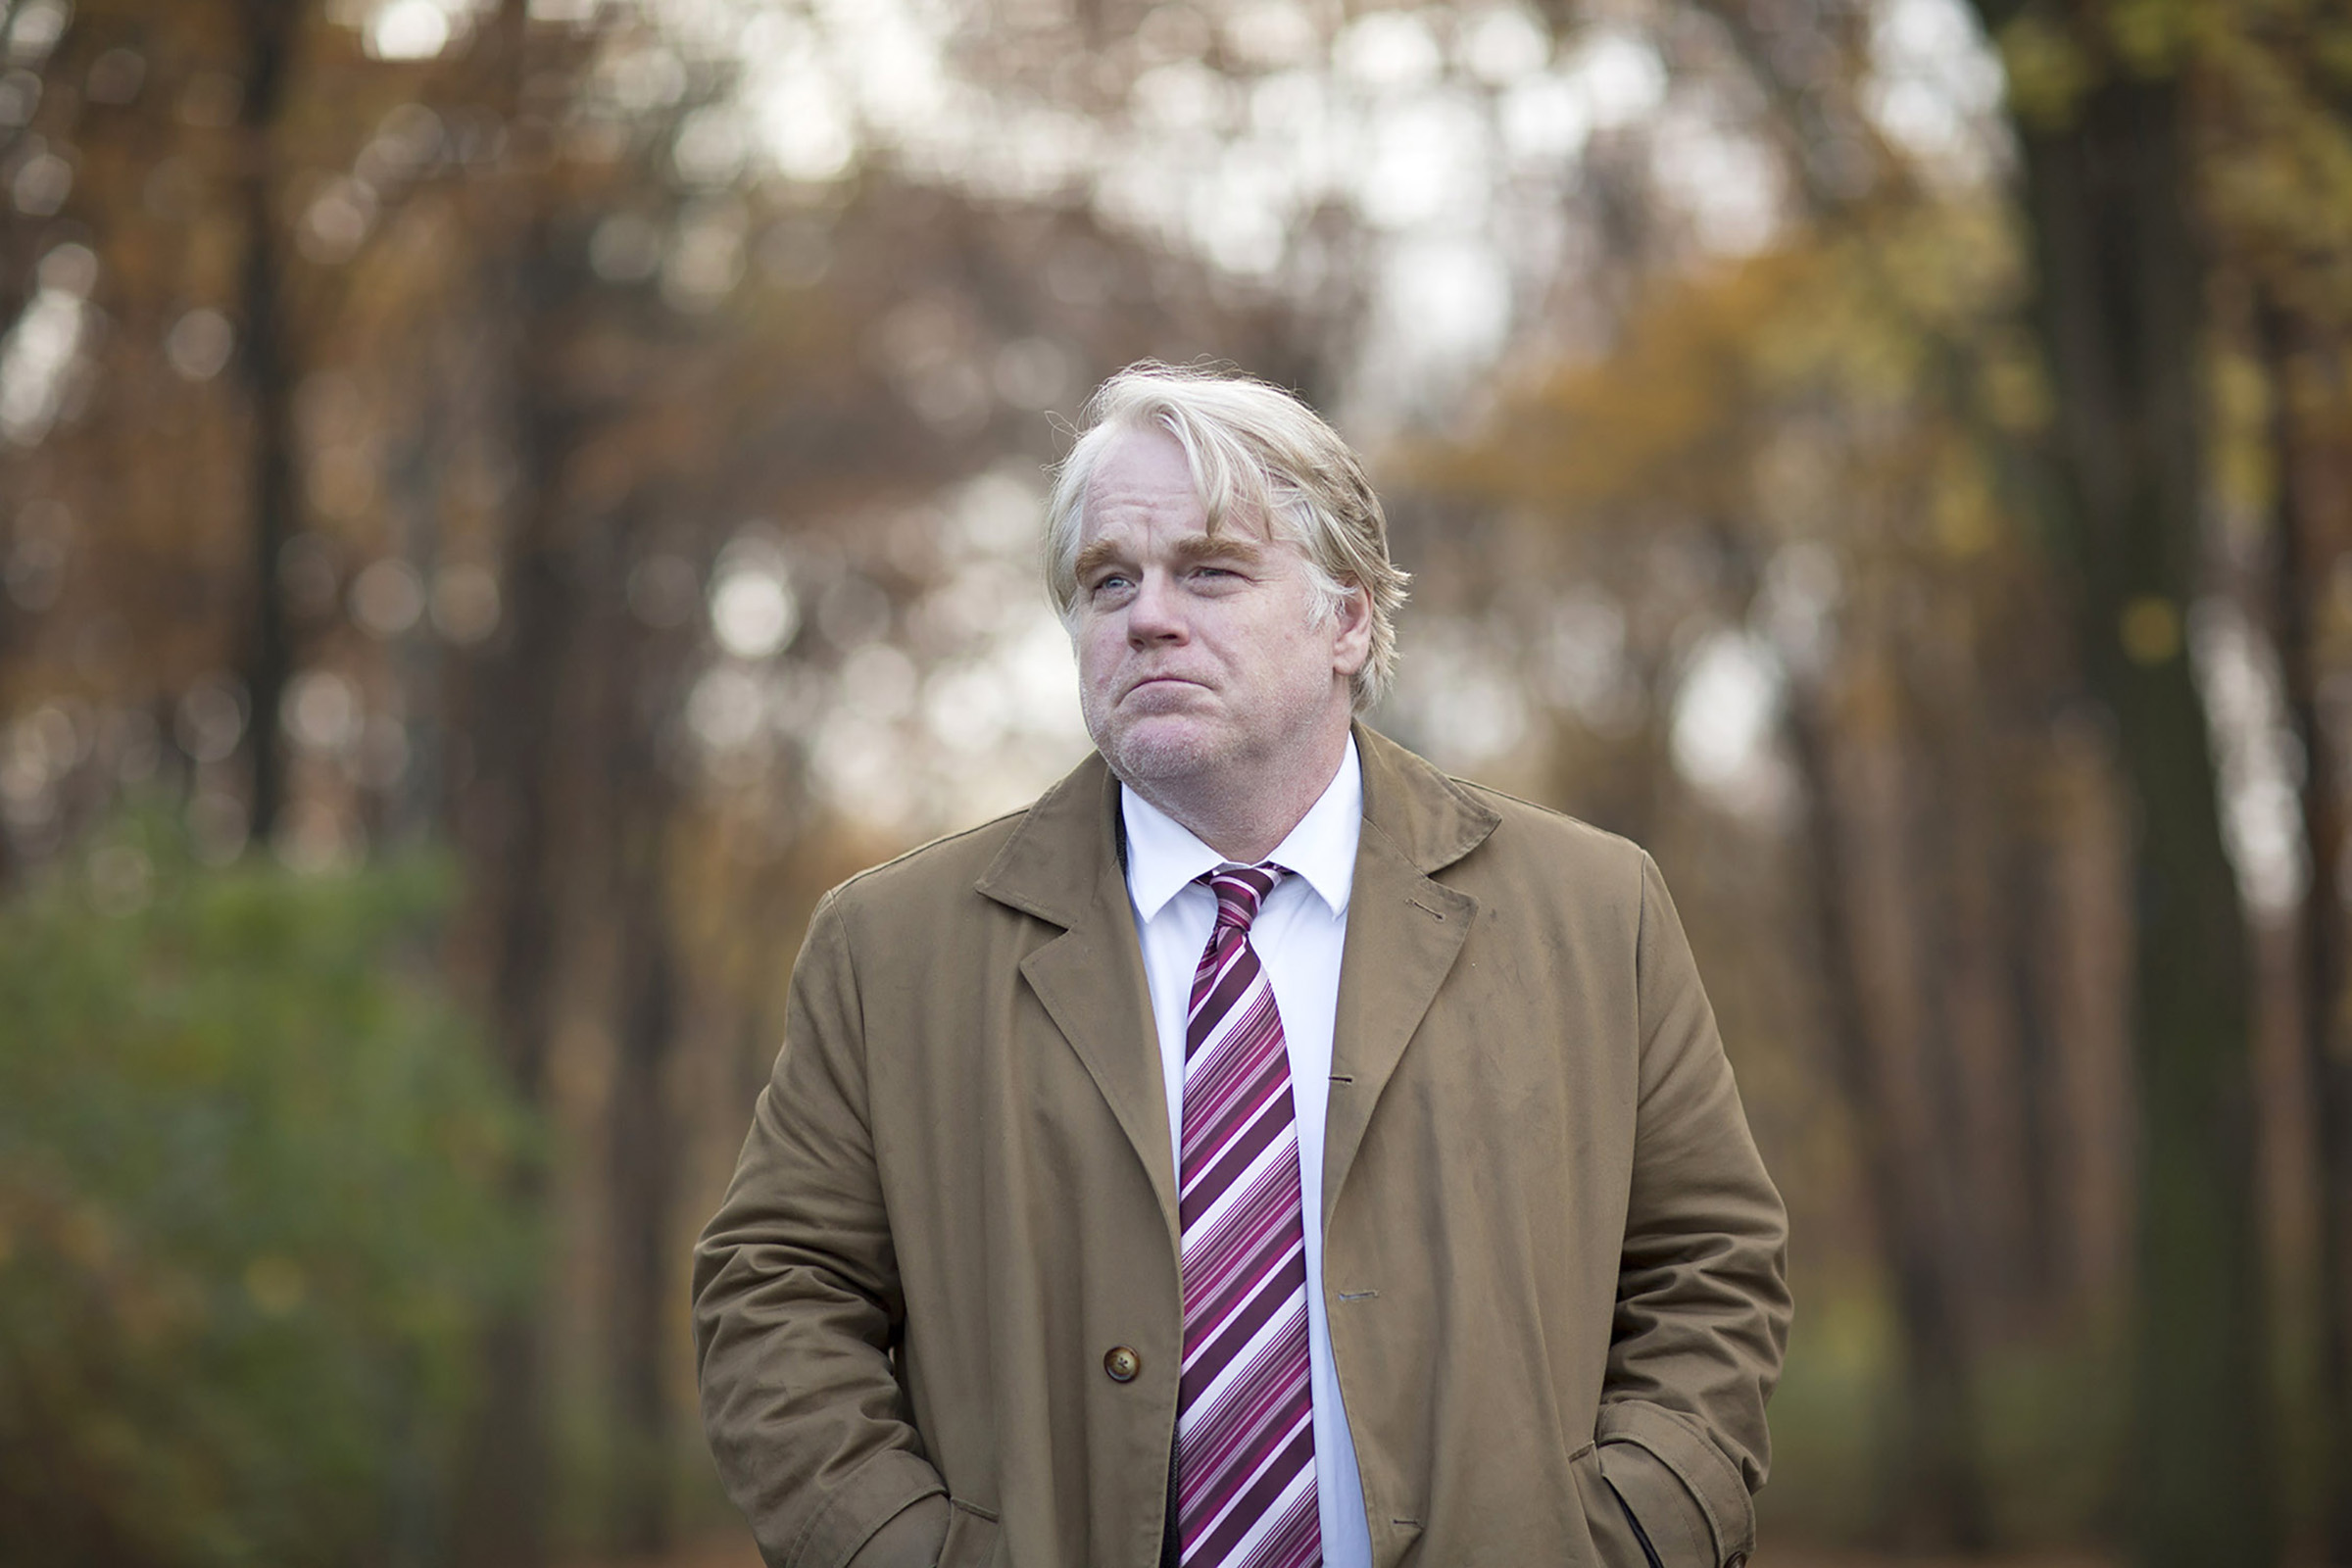 Philip Seymour Hoffman in A Most Wanted Man. (Roadside Attractions/Everett Collection)